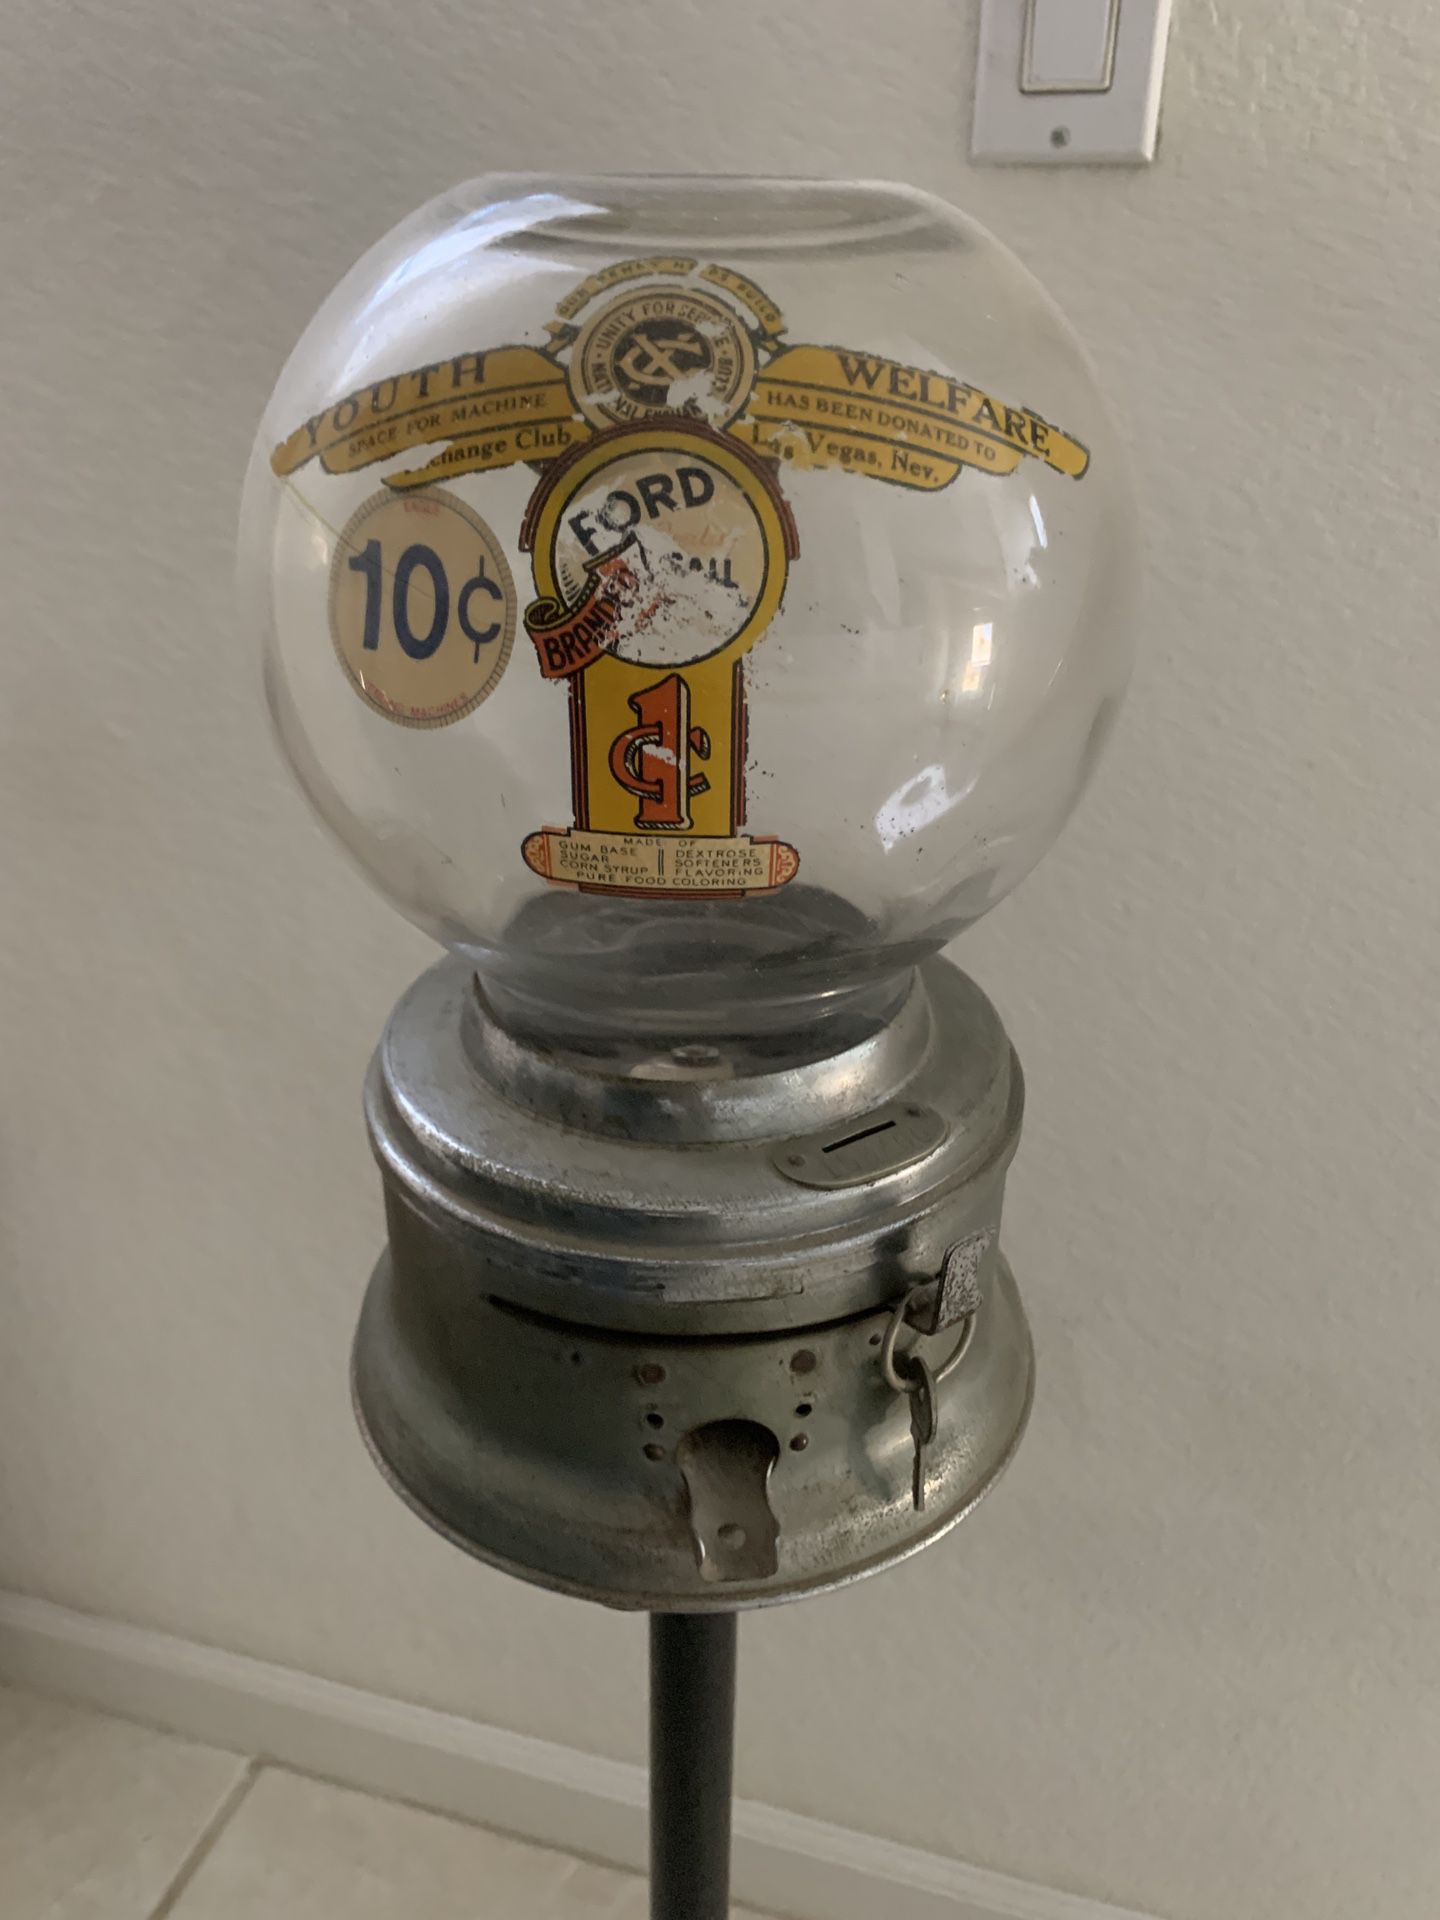 Vintage Ford Gumball Machine w/ Stand with original glass globe, (10 cents)